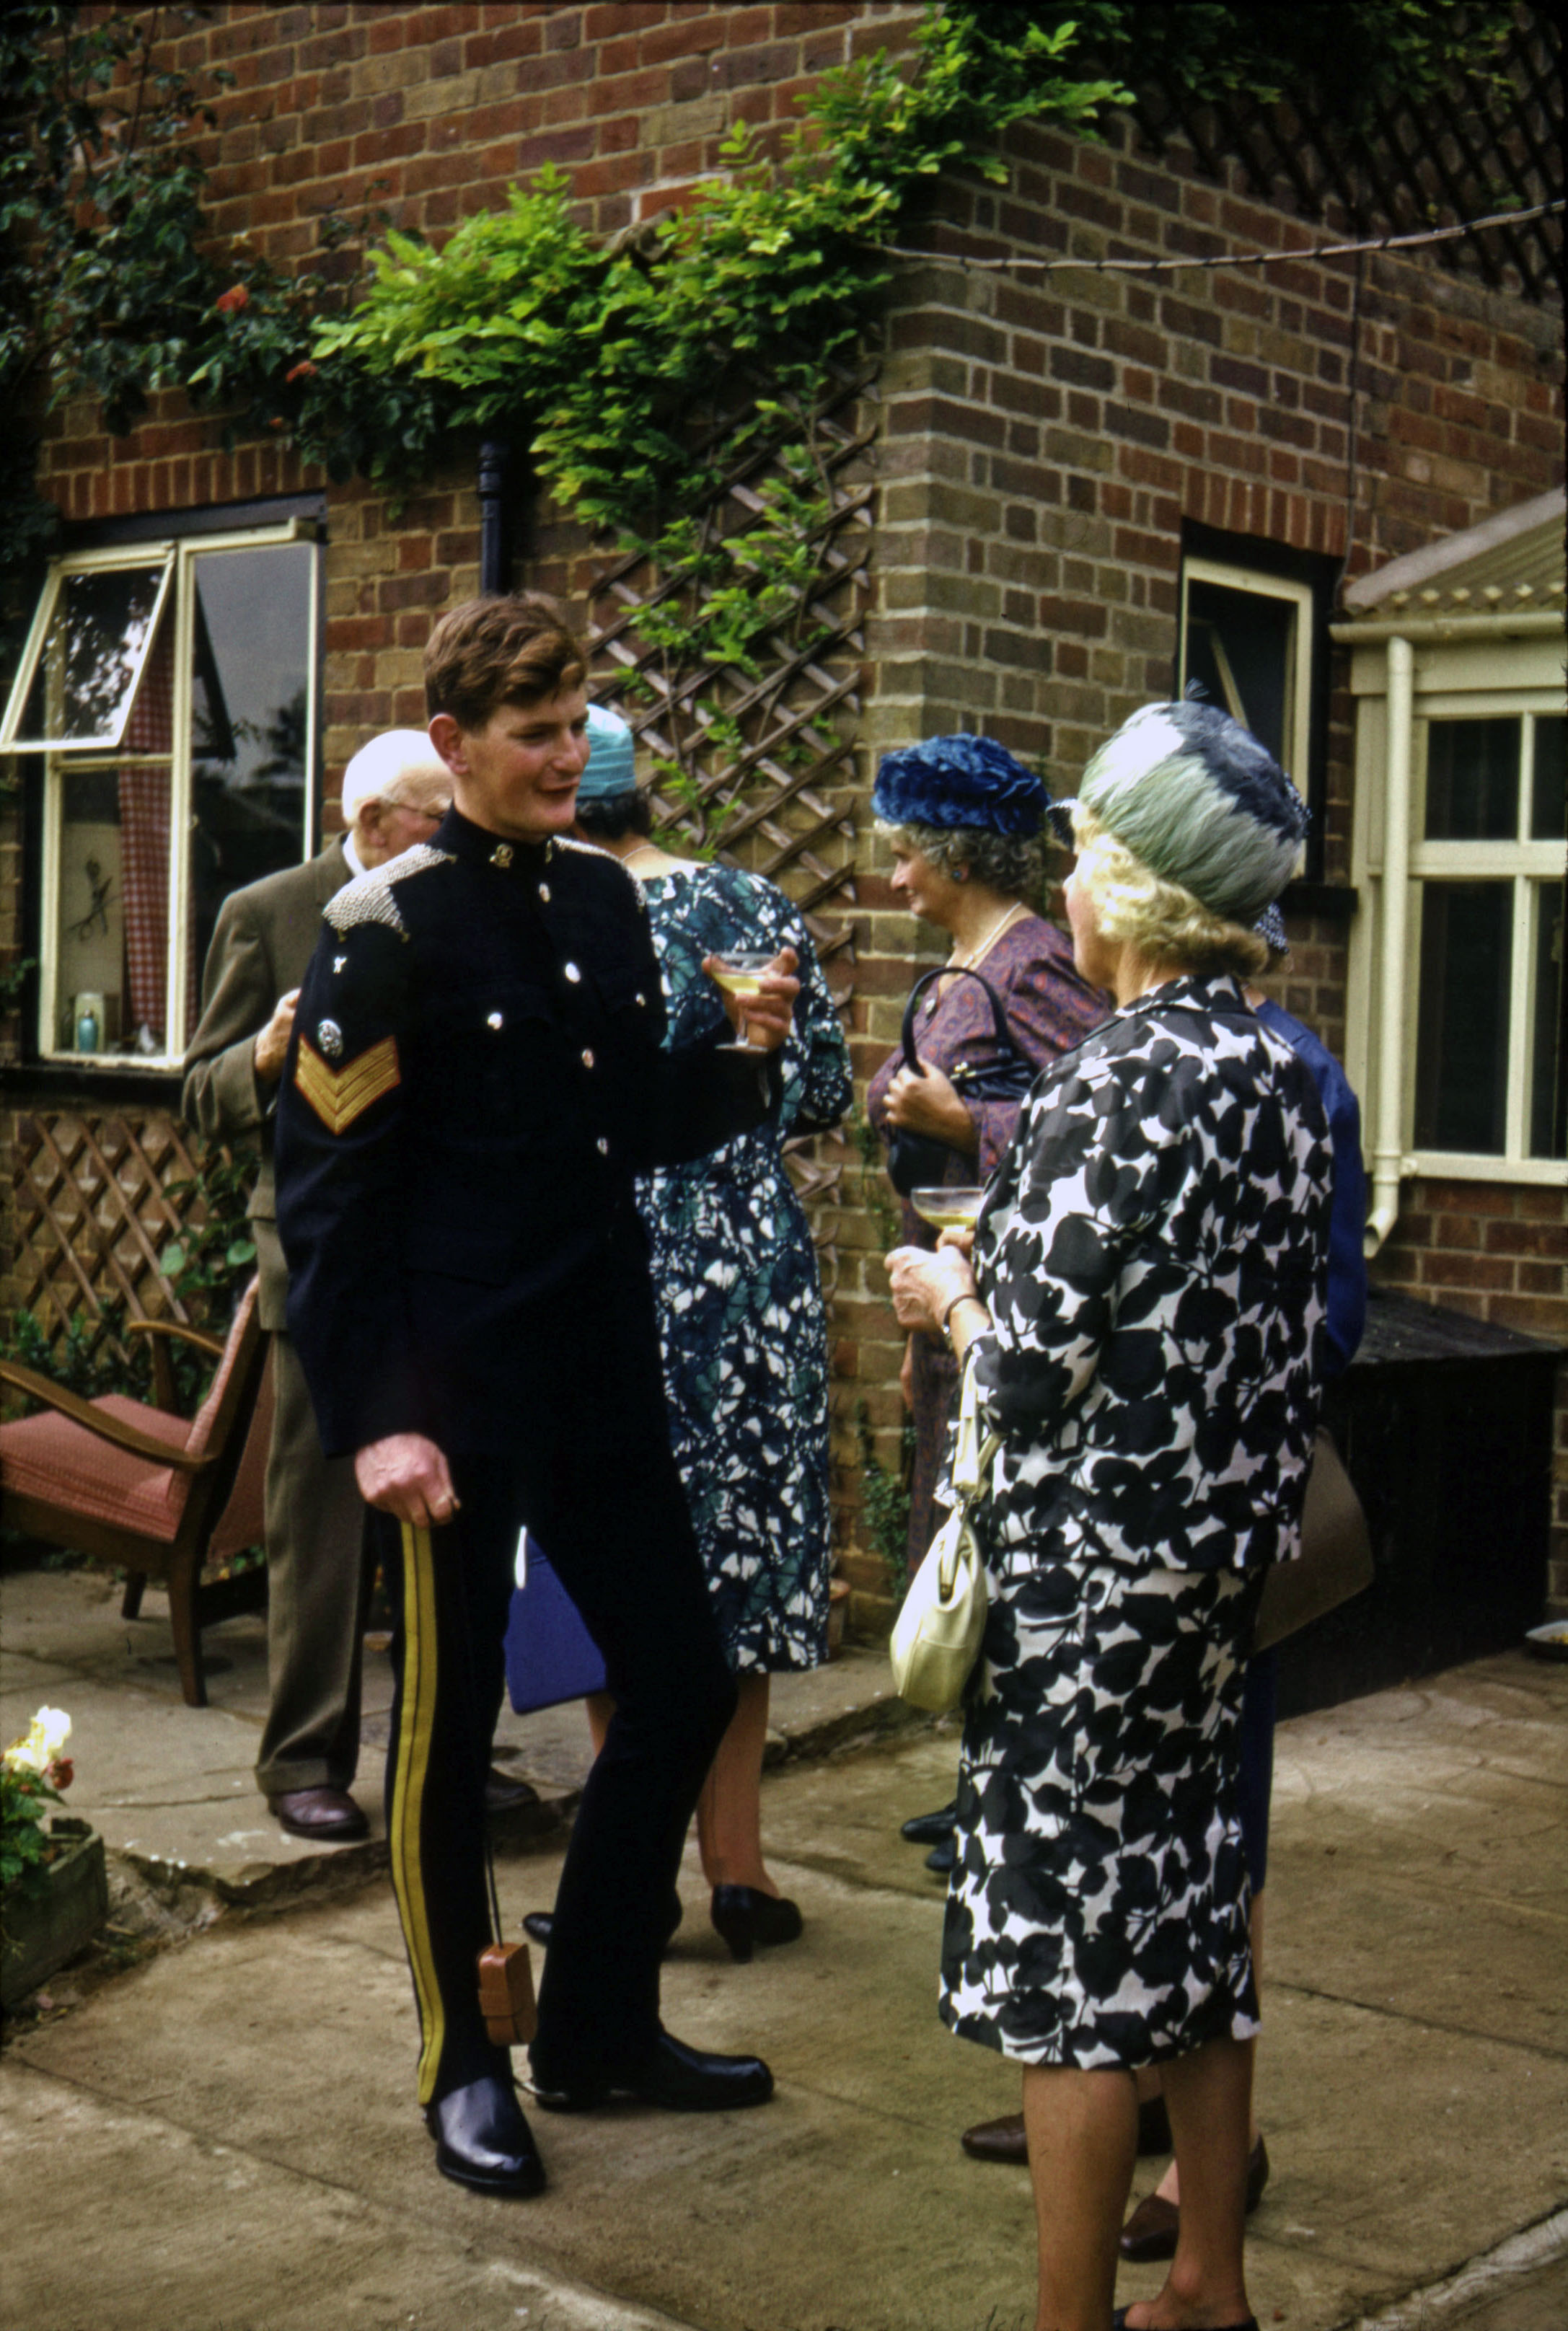 19 Aug 1965 Henry after his wedding ceremony